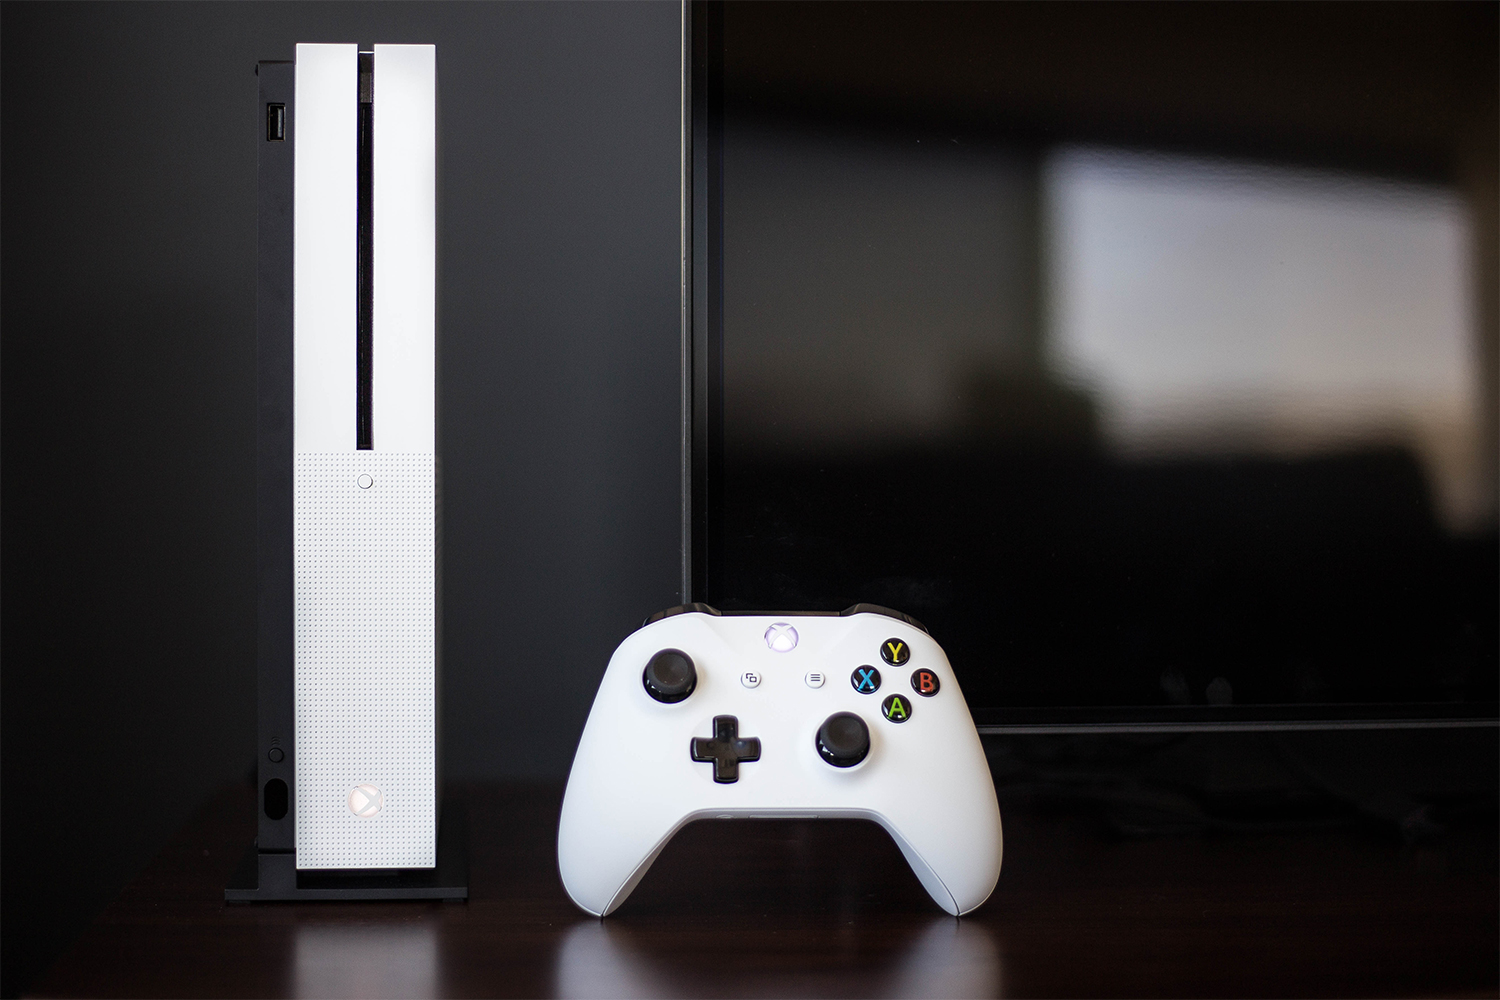 Xbox One April Update Brings a Slew of New Video and Streaming Options